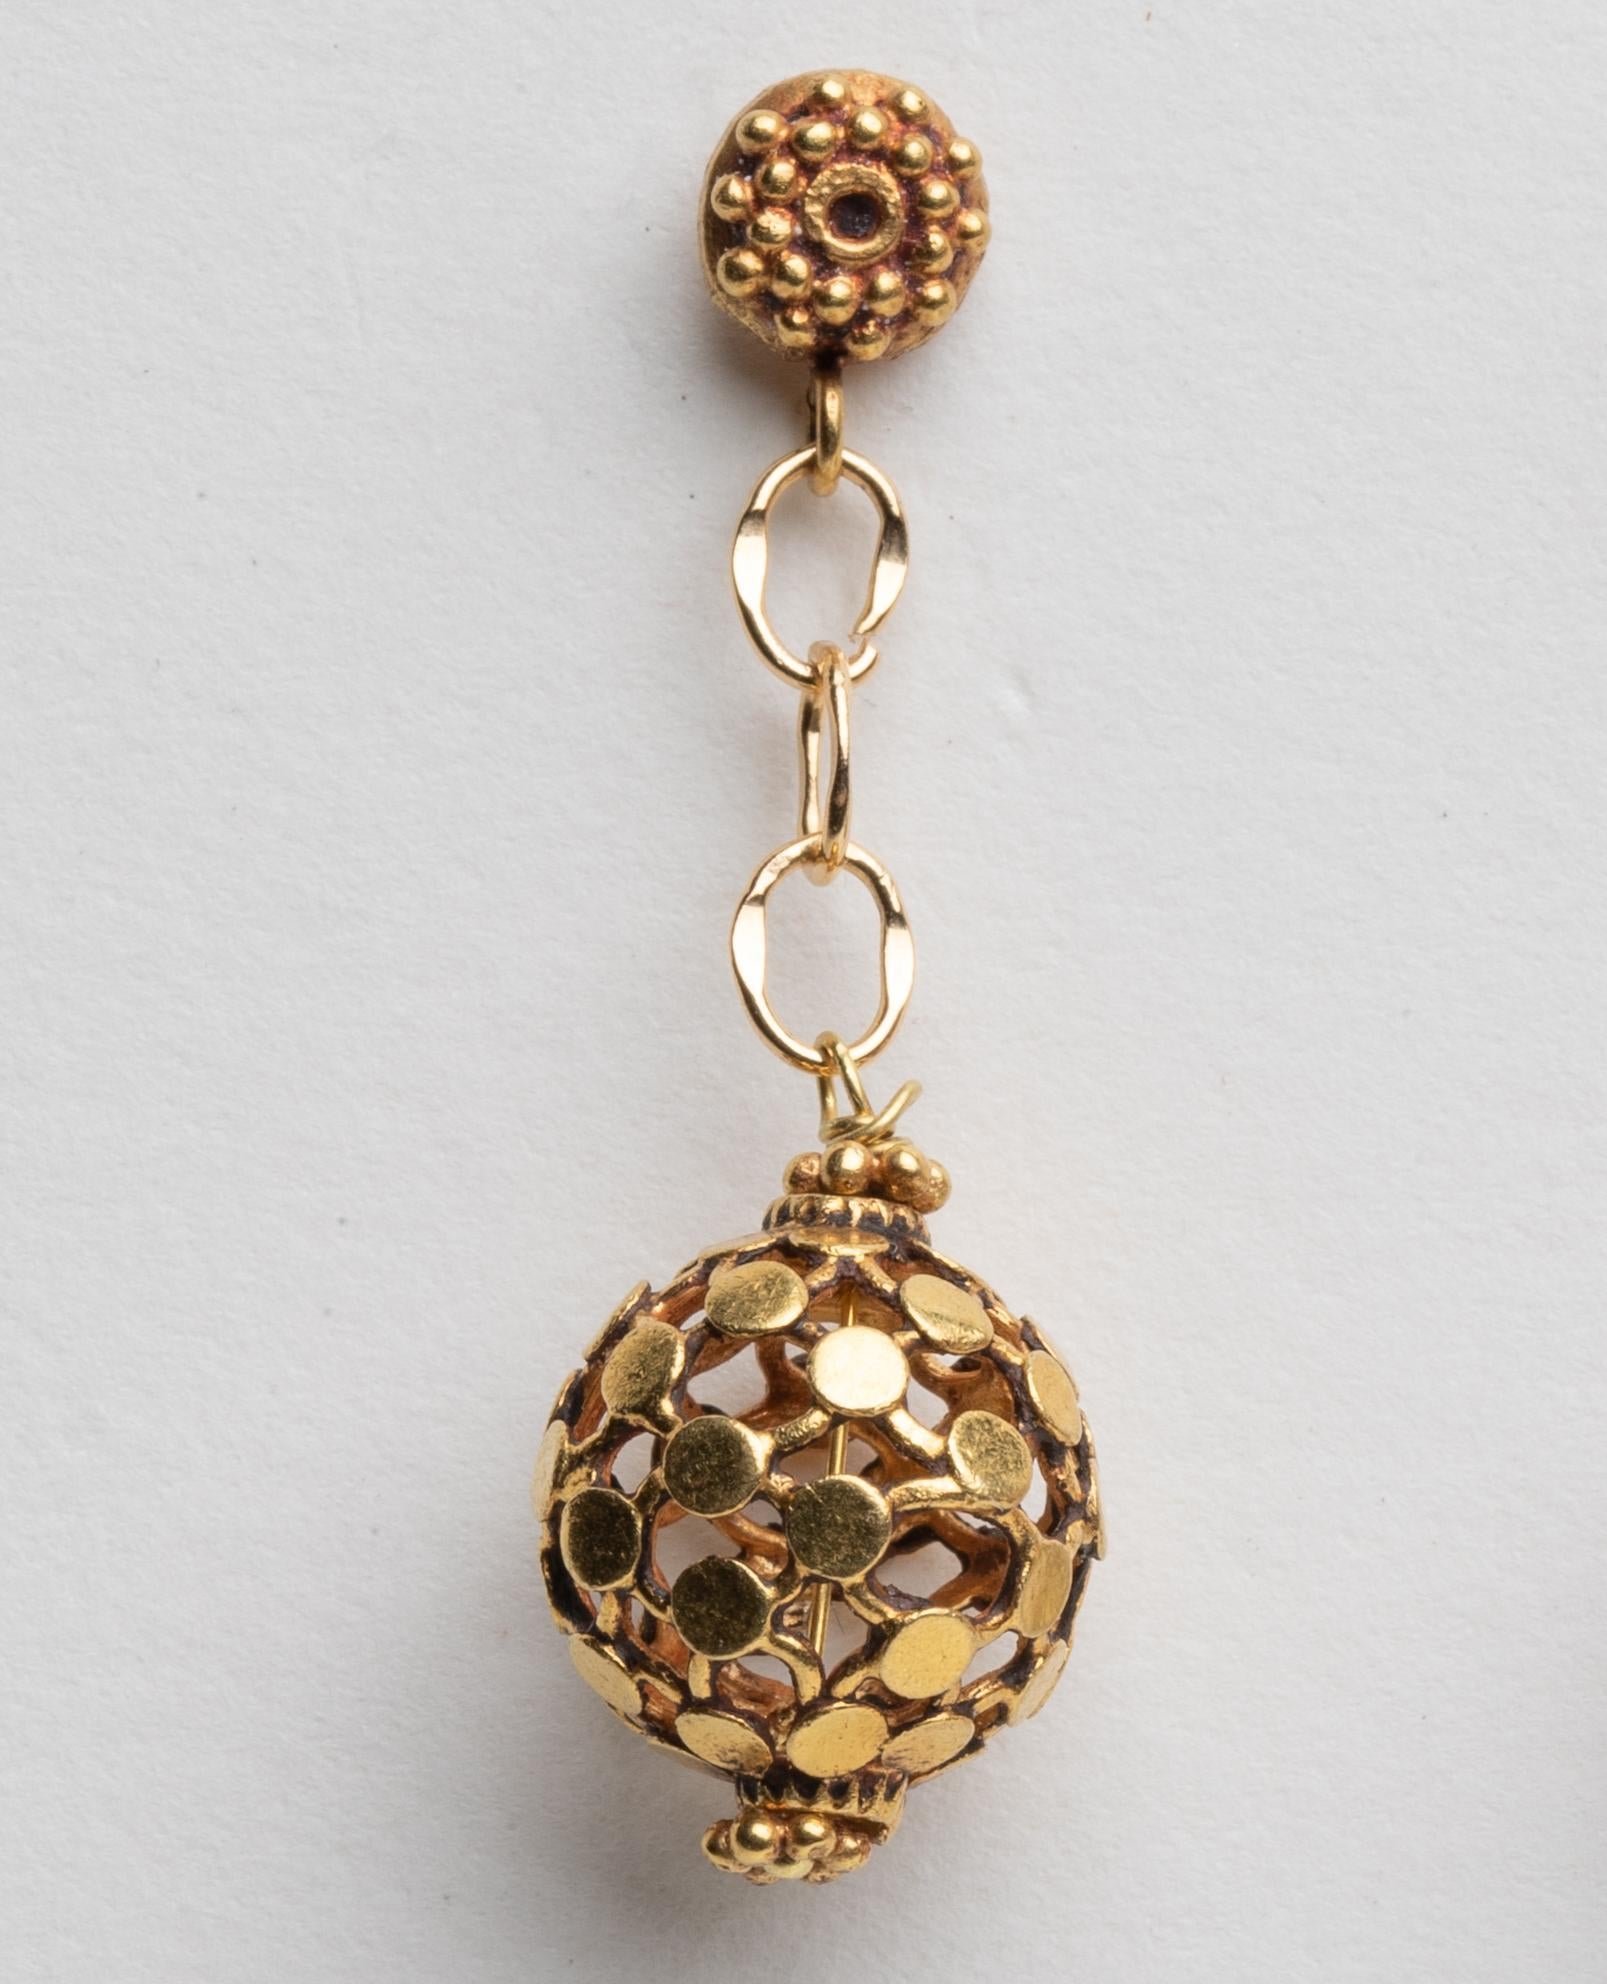 An unusual pair of 18K gold dimpled ball earrings dangling from a gold chain and granulated gold post.  For pierced ears.  By Deborah Lockhart Phillips.